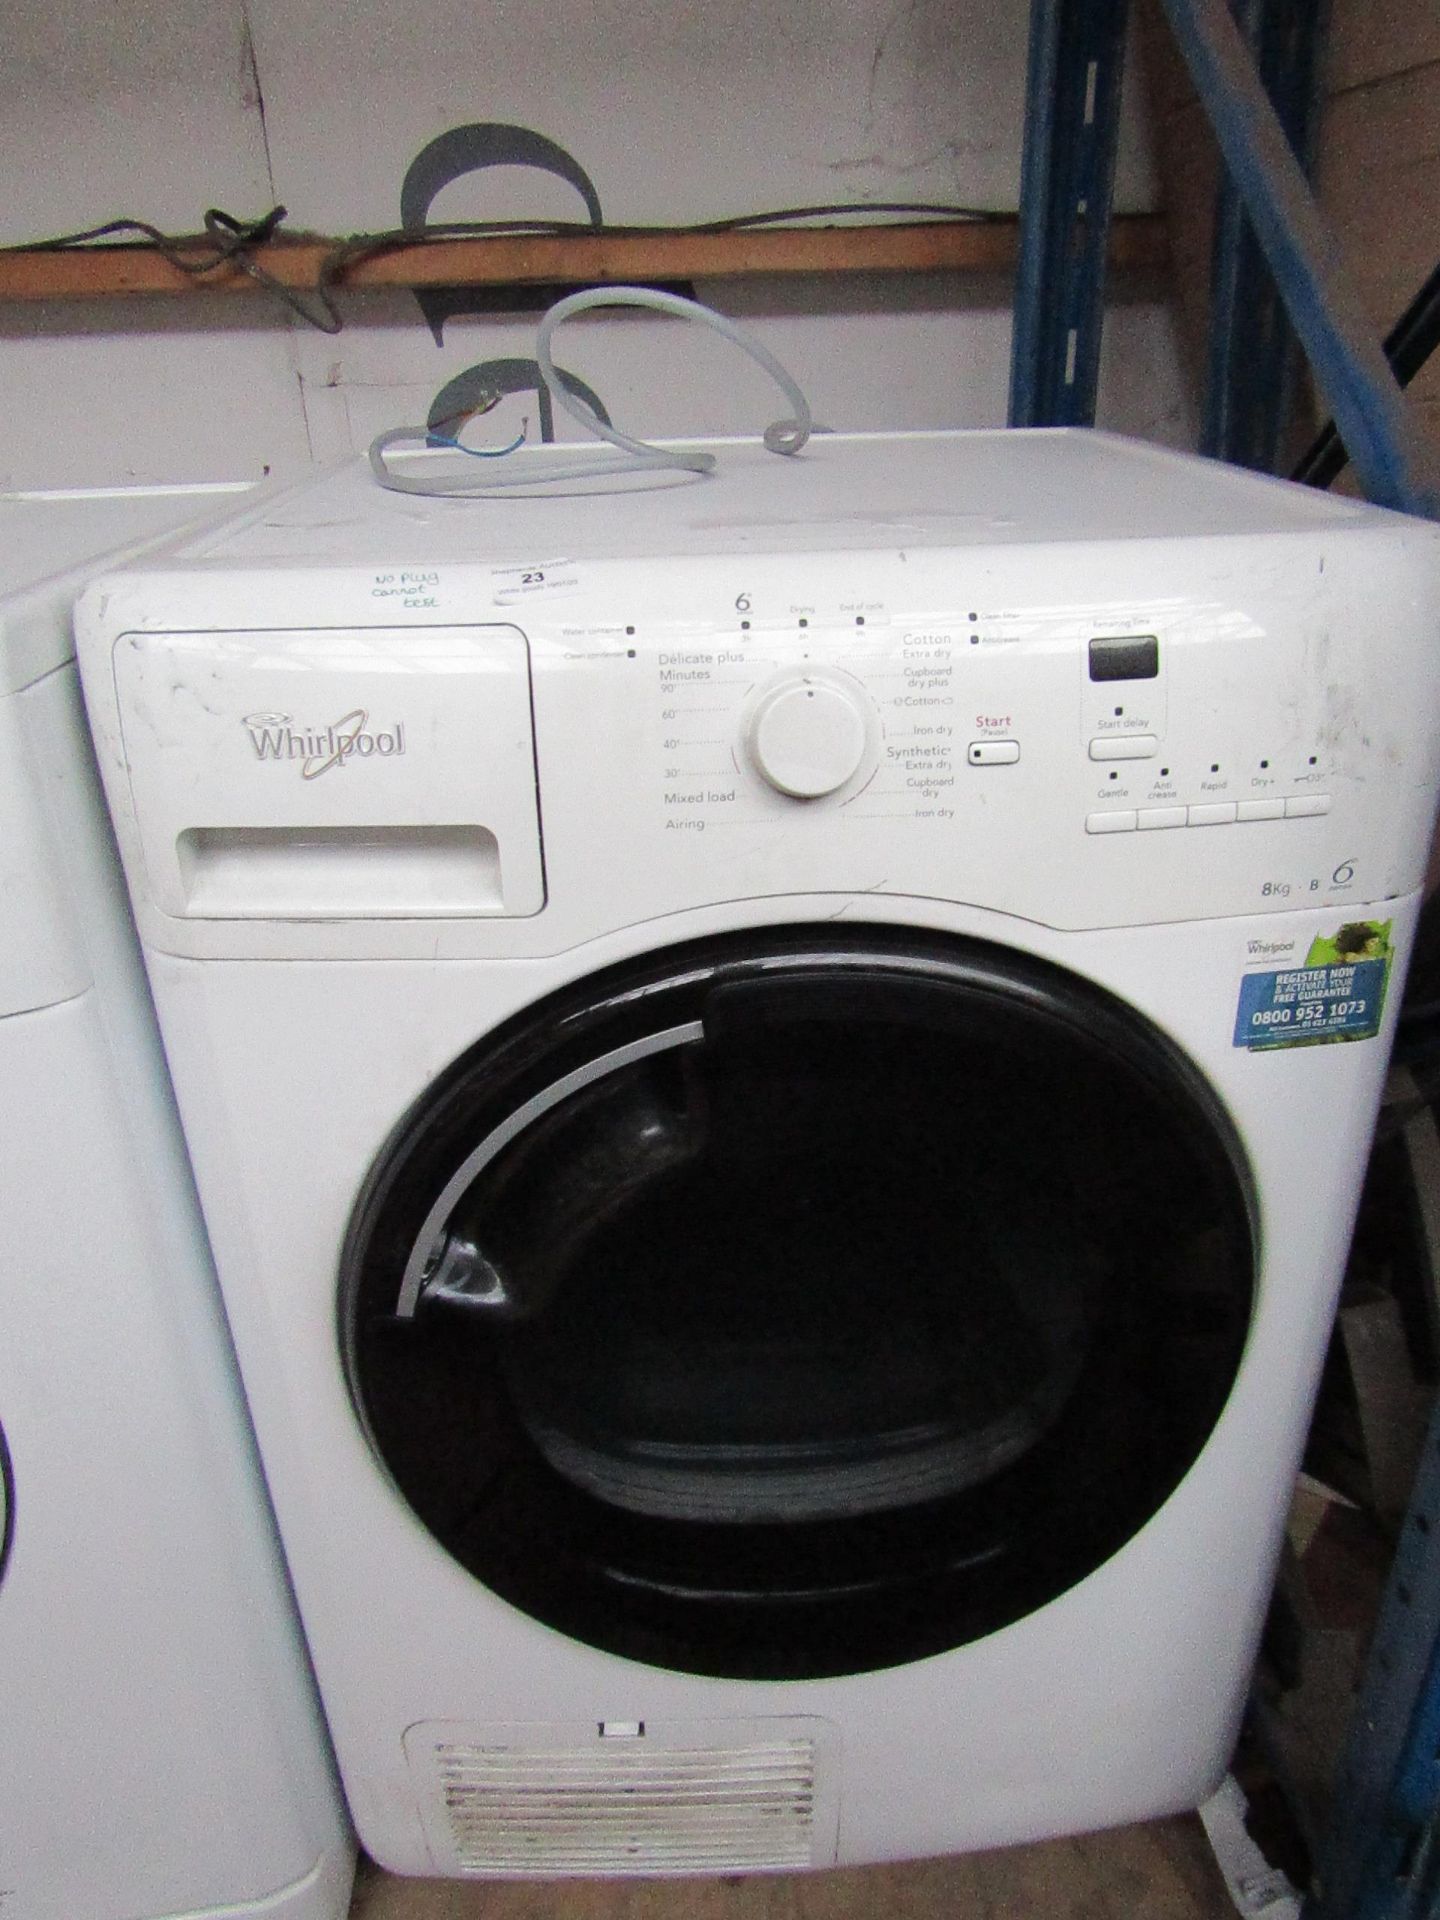 whirlpool - WWCR 9435/1 - 9Kg 1400rpm 6th sense colours, White - No Plug, Cannot be Tested.